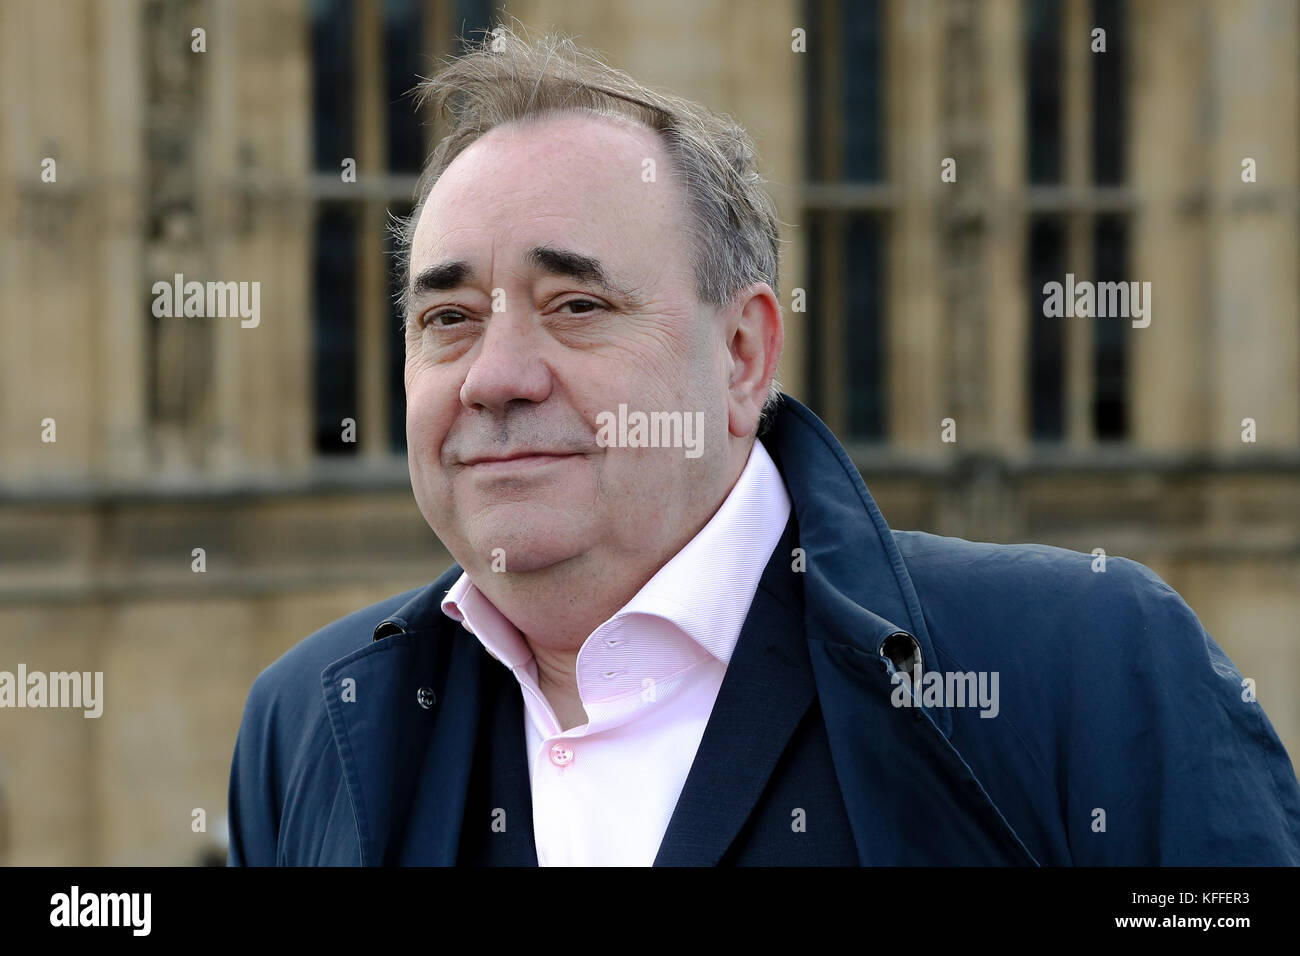 Westminster. London. UK 28 Oct 2017 - Alex Salmond, former First Minister of Scotland on Westminster Bridge Credit: Dinendra Haria/Alamy Live News Stock Photo